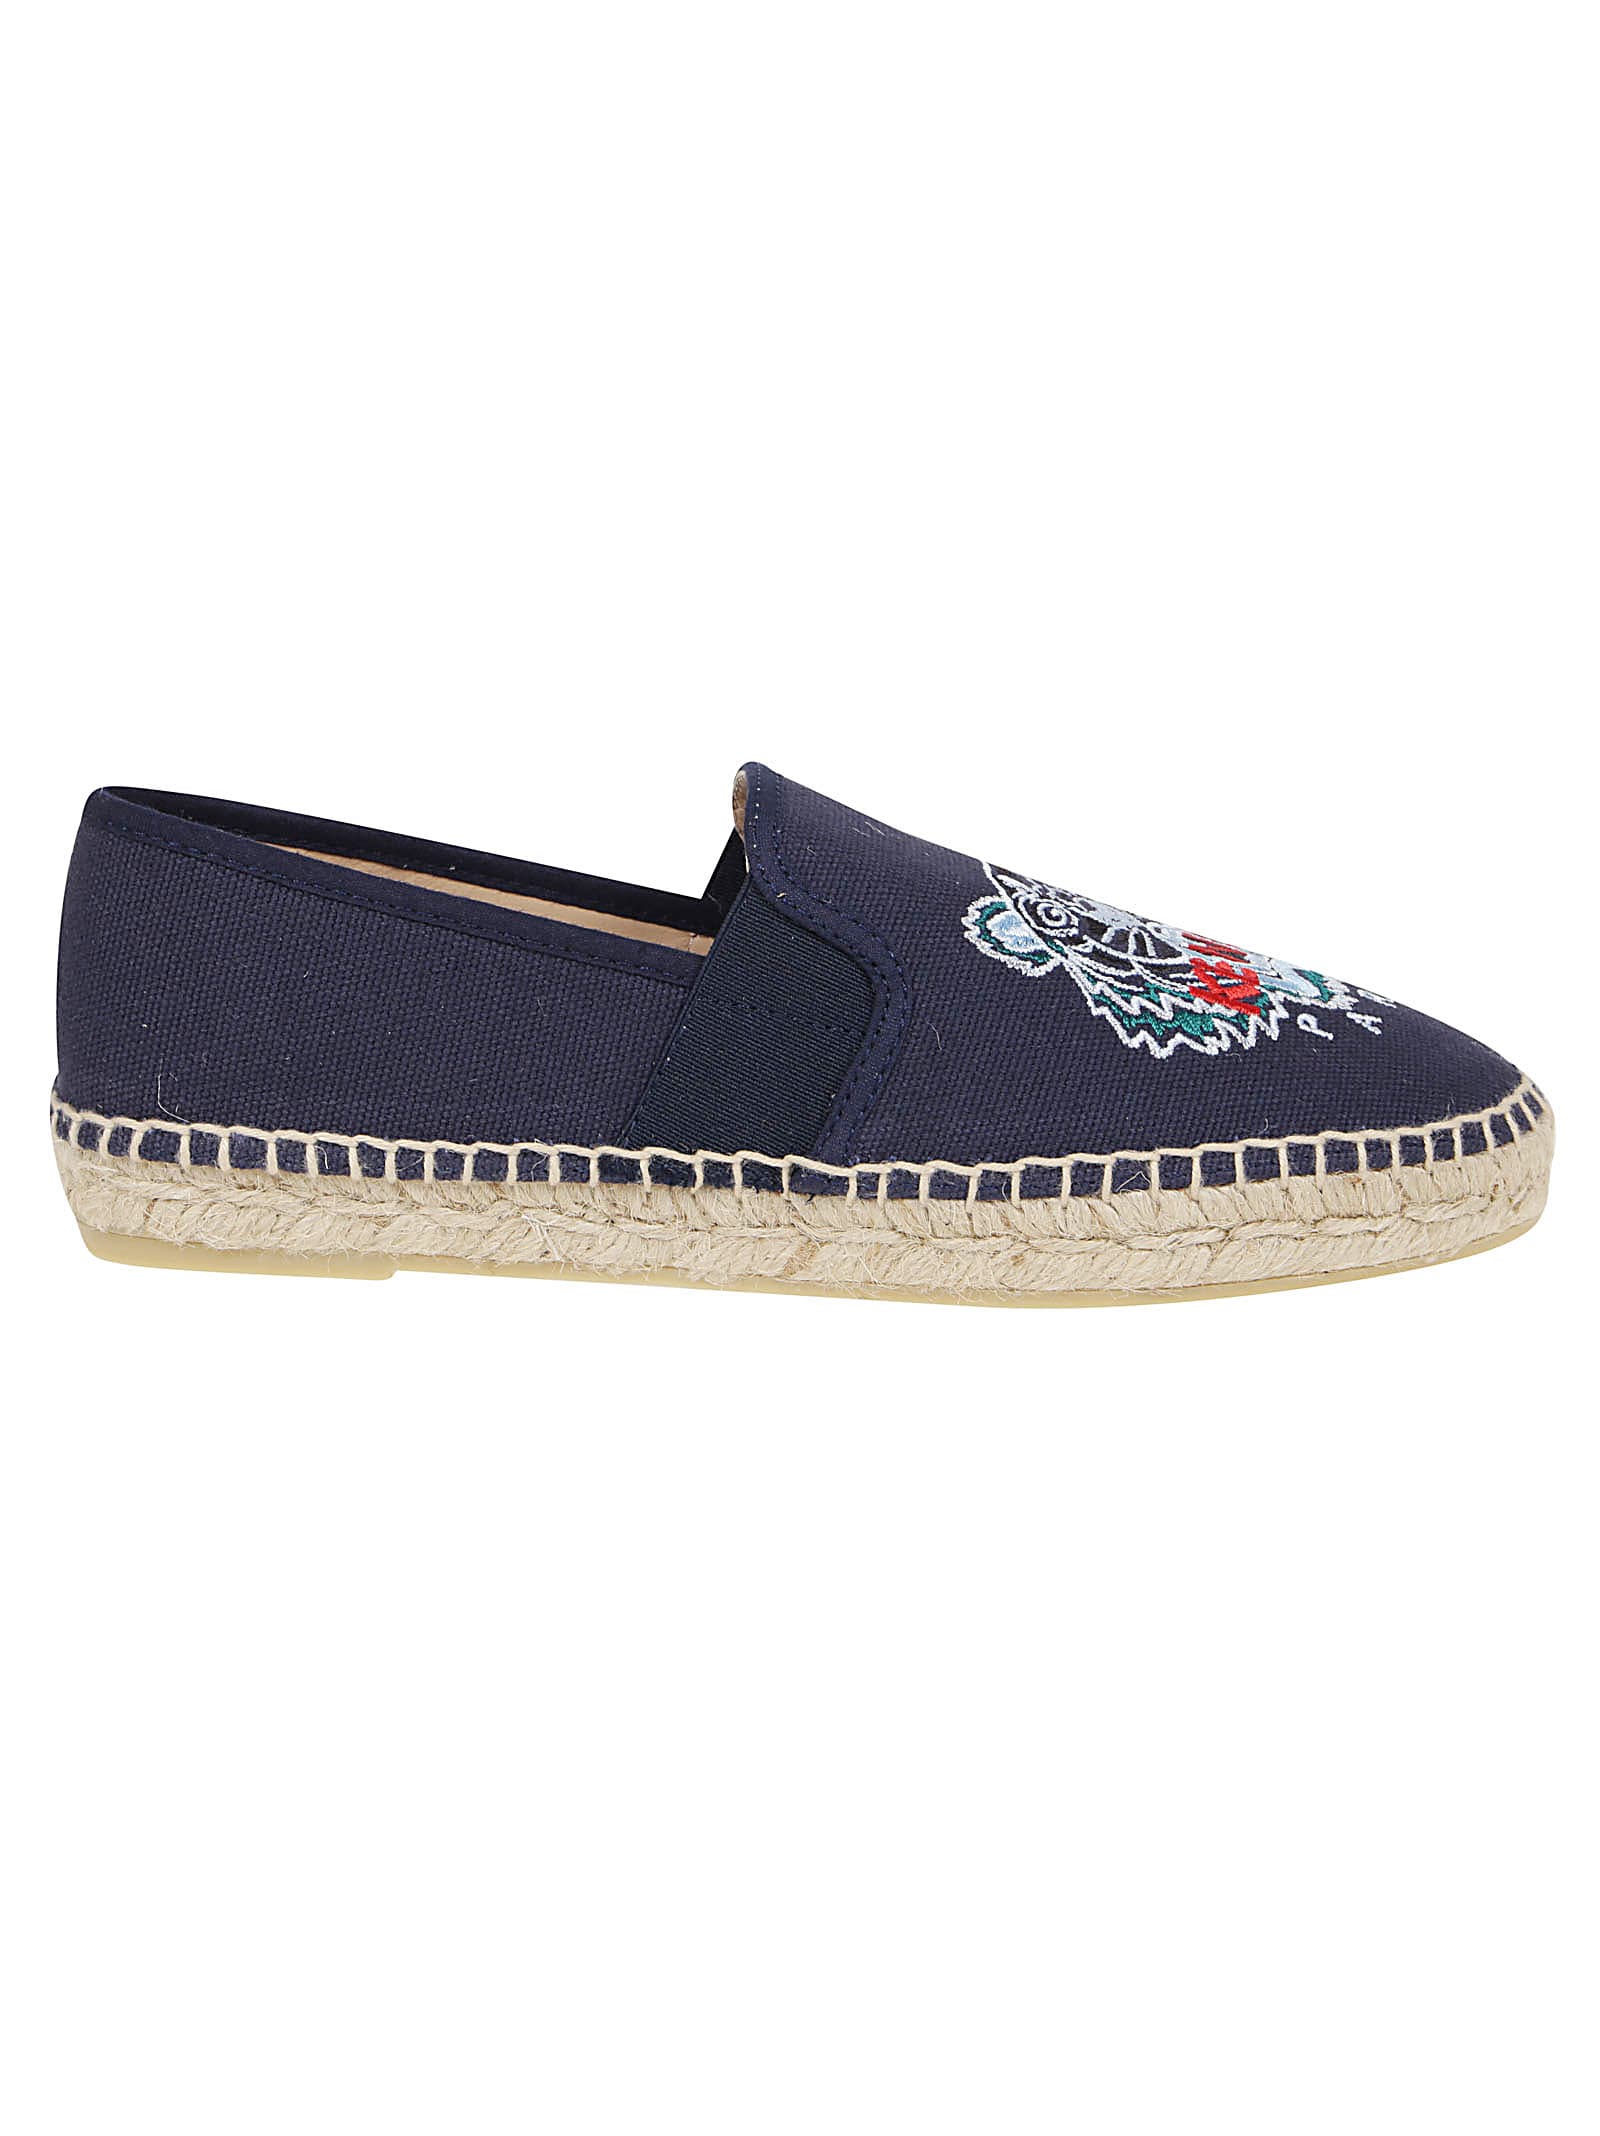 Buy Kenzo Espadrille Elastic Tiger online, shop Kenzo shoes with free shipping